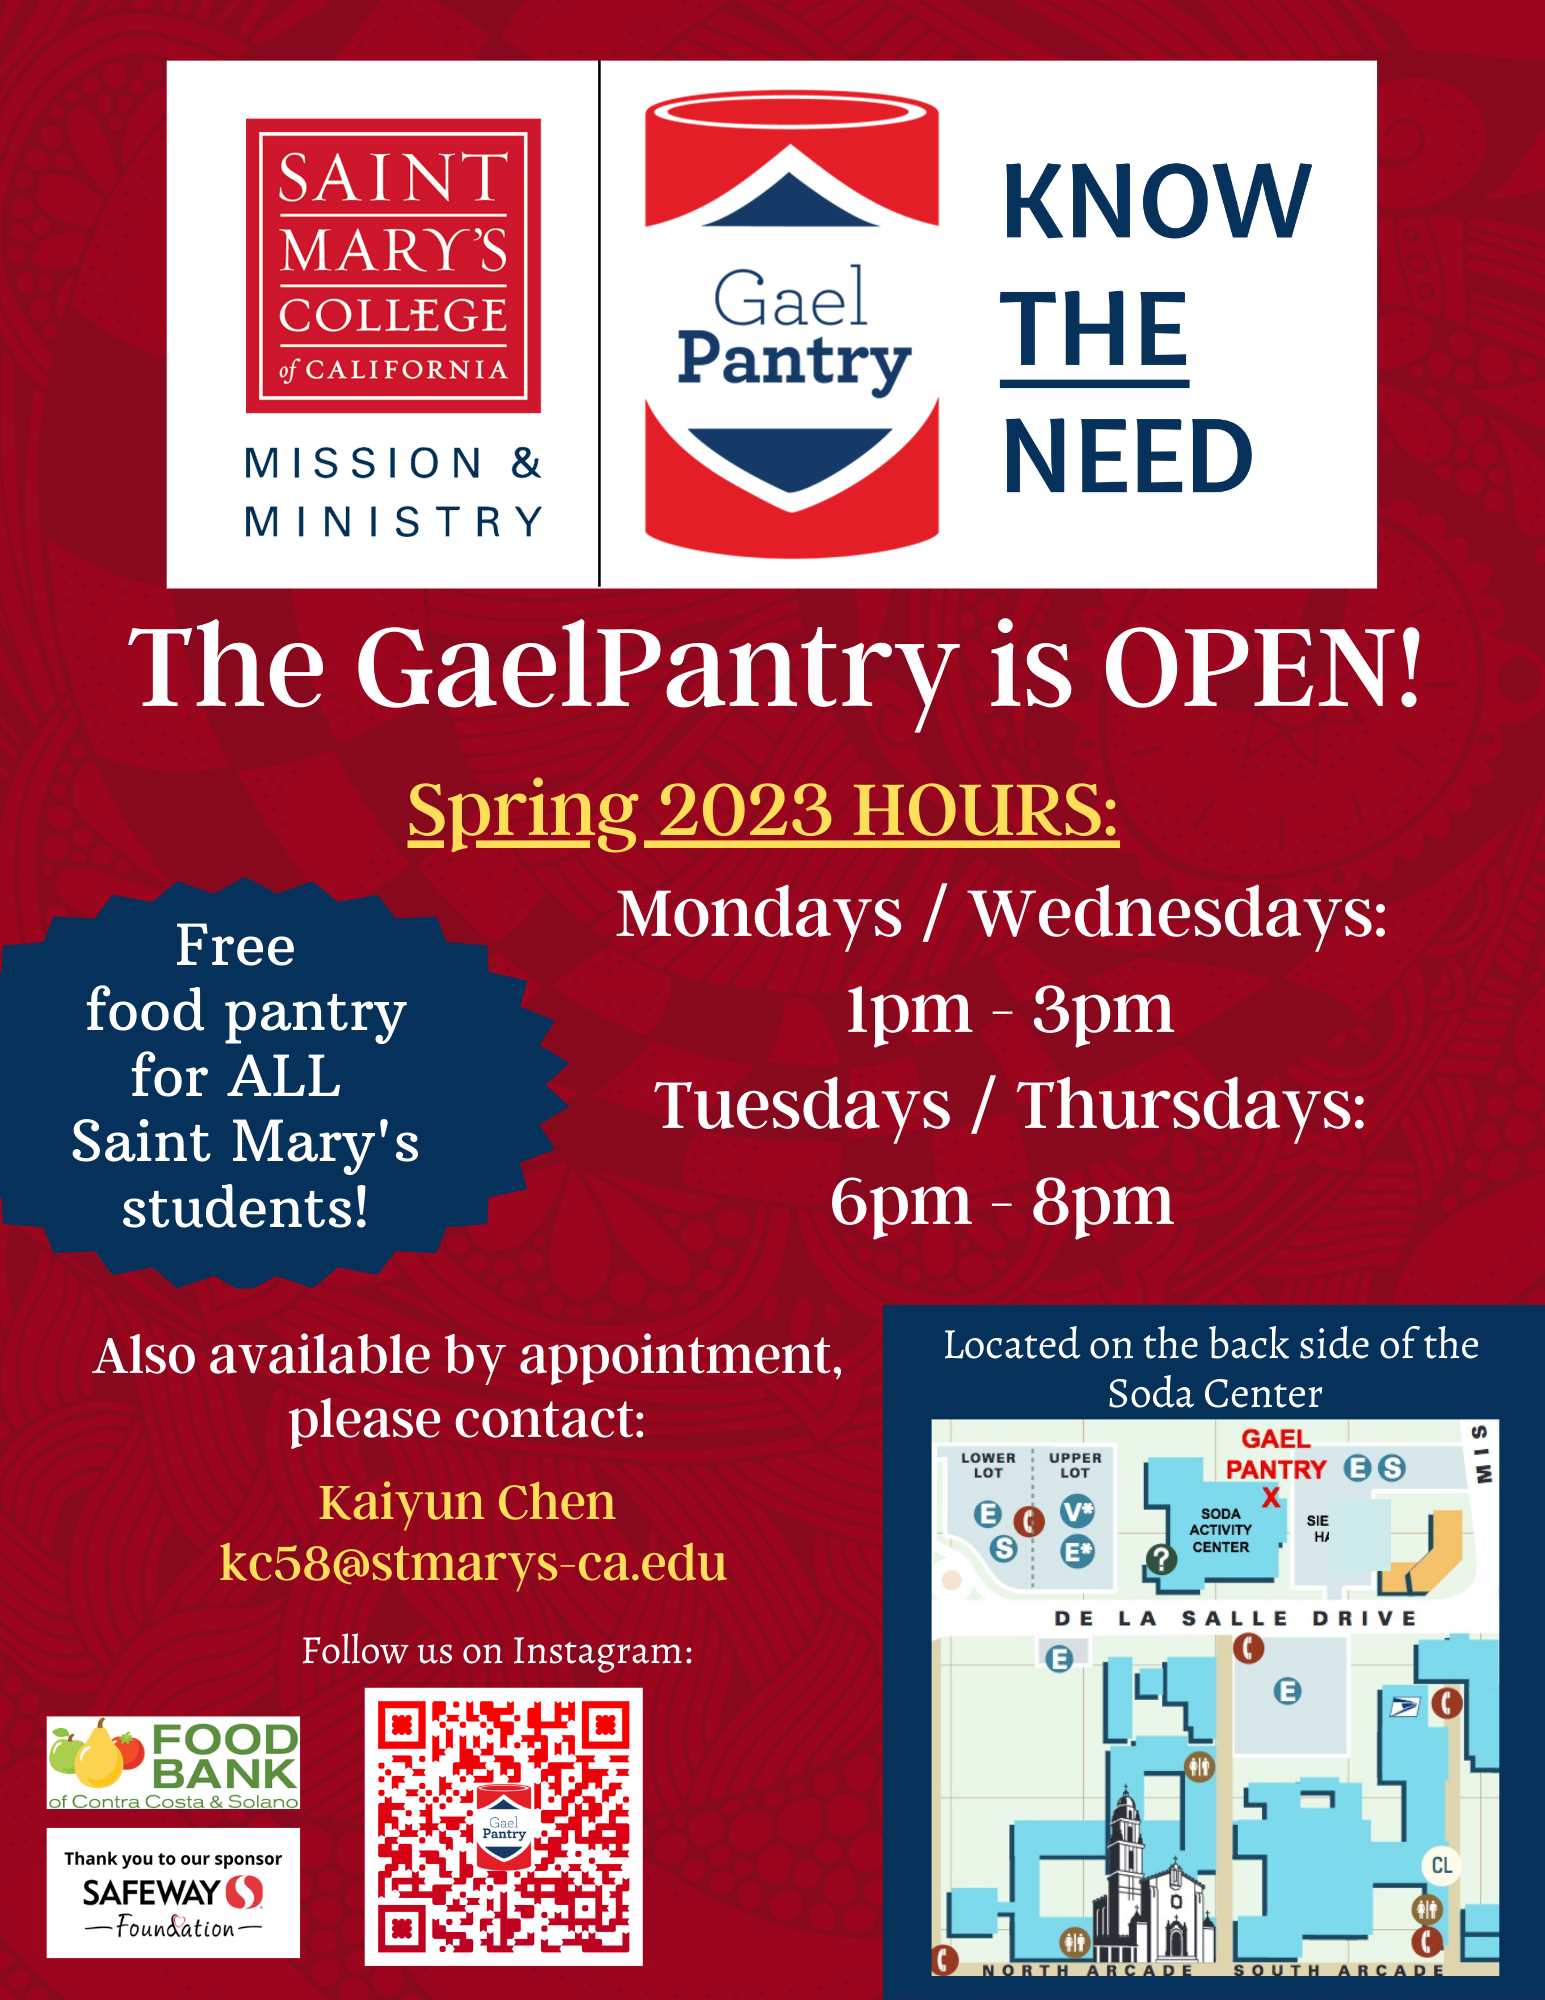 Flyer with a red background, the GaelPantry logo, a map of the GaelPantry location, and the GaelPantry hours for Spring 2023.